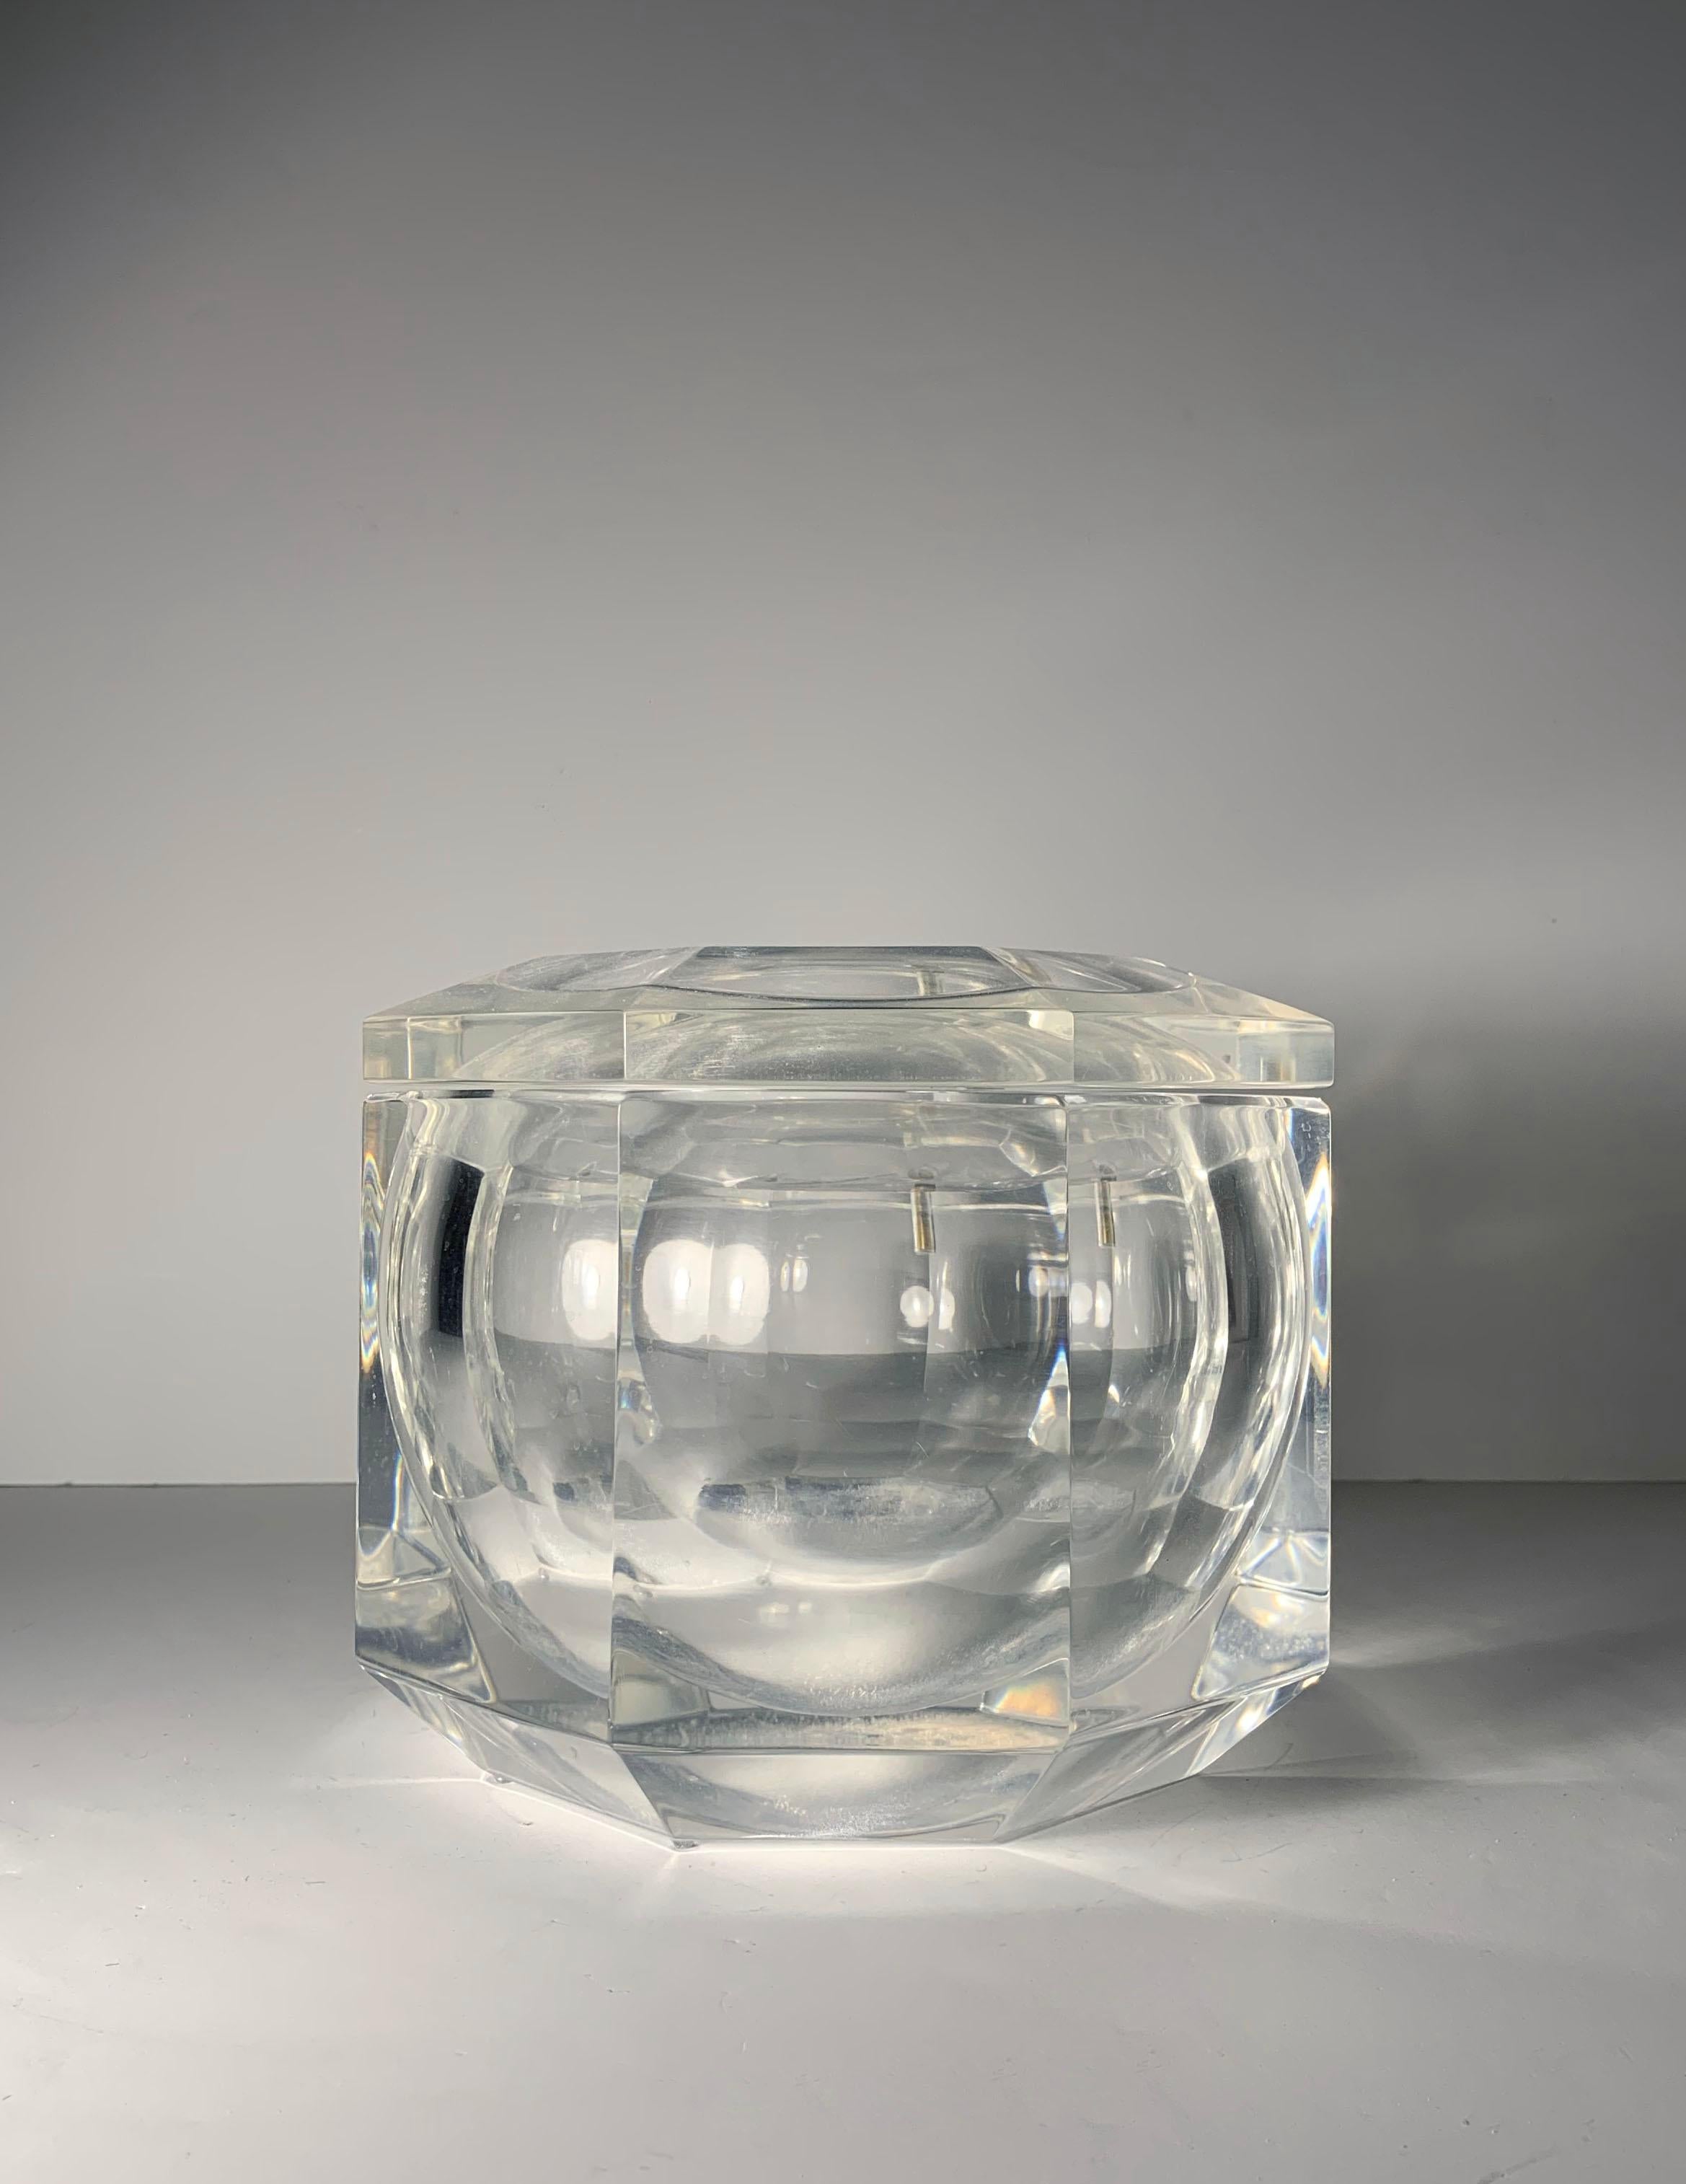 A large vintage Lucite gem ice bucket by Allesandro Albrizzi. 1970s

Lucite shows nice age with some craqueling. some the tiny plastic nipple glides on bottom have come off.